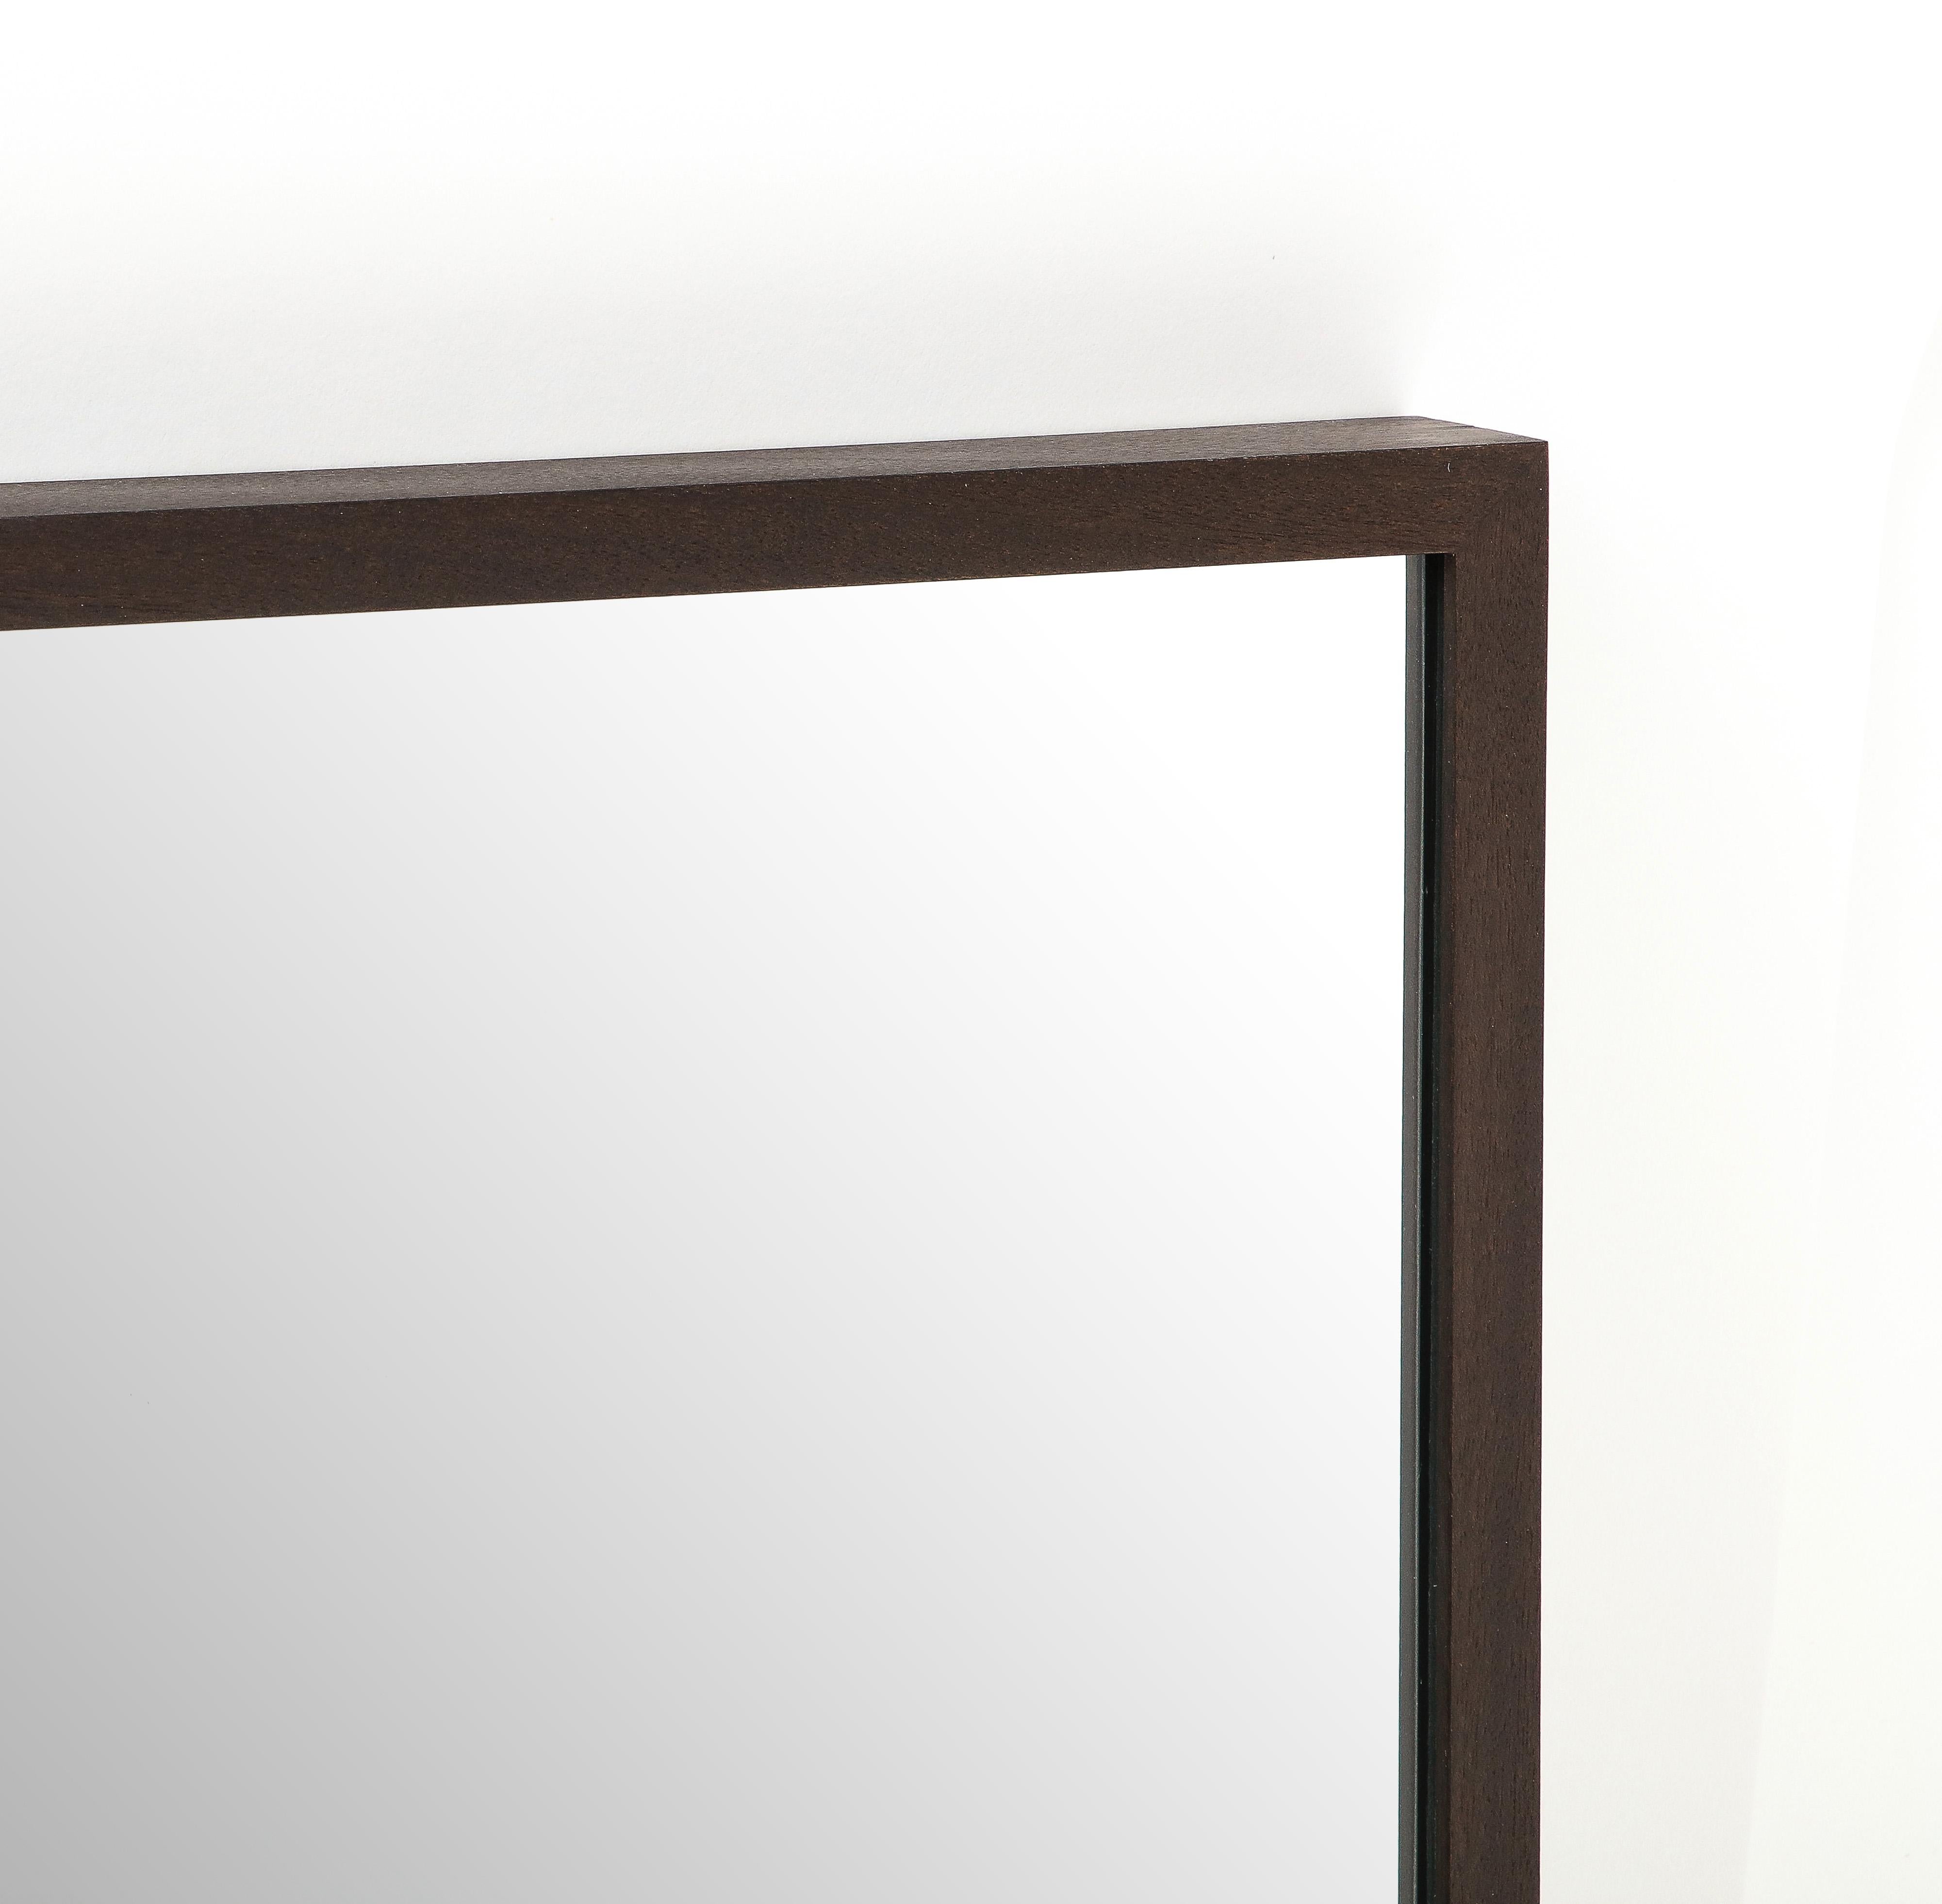 Black Stained Oak Wall Mirror, Contemporary In Excellent Condition For Sale In New York City, NY